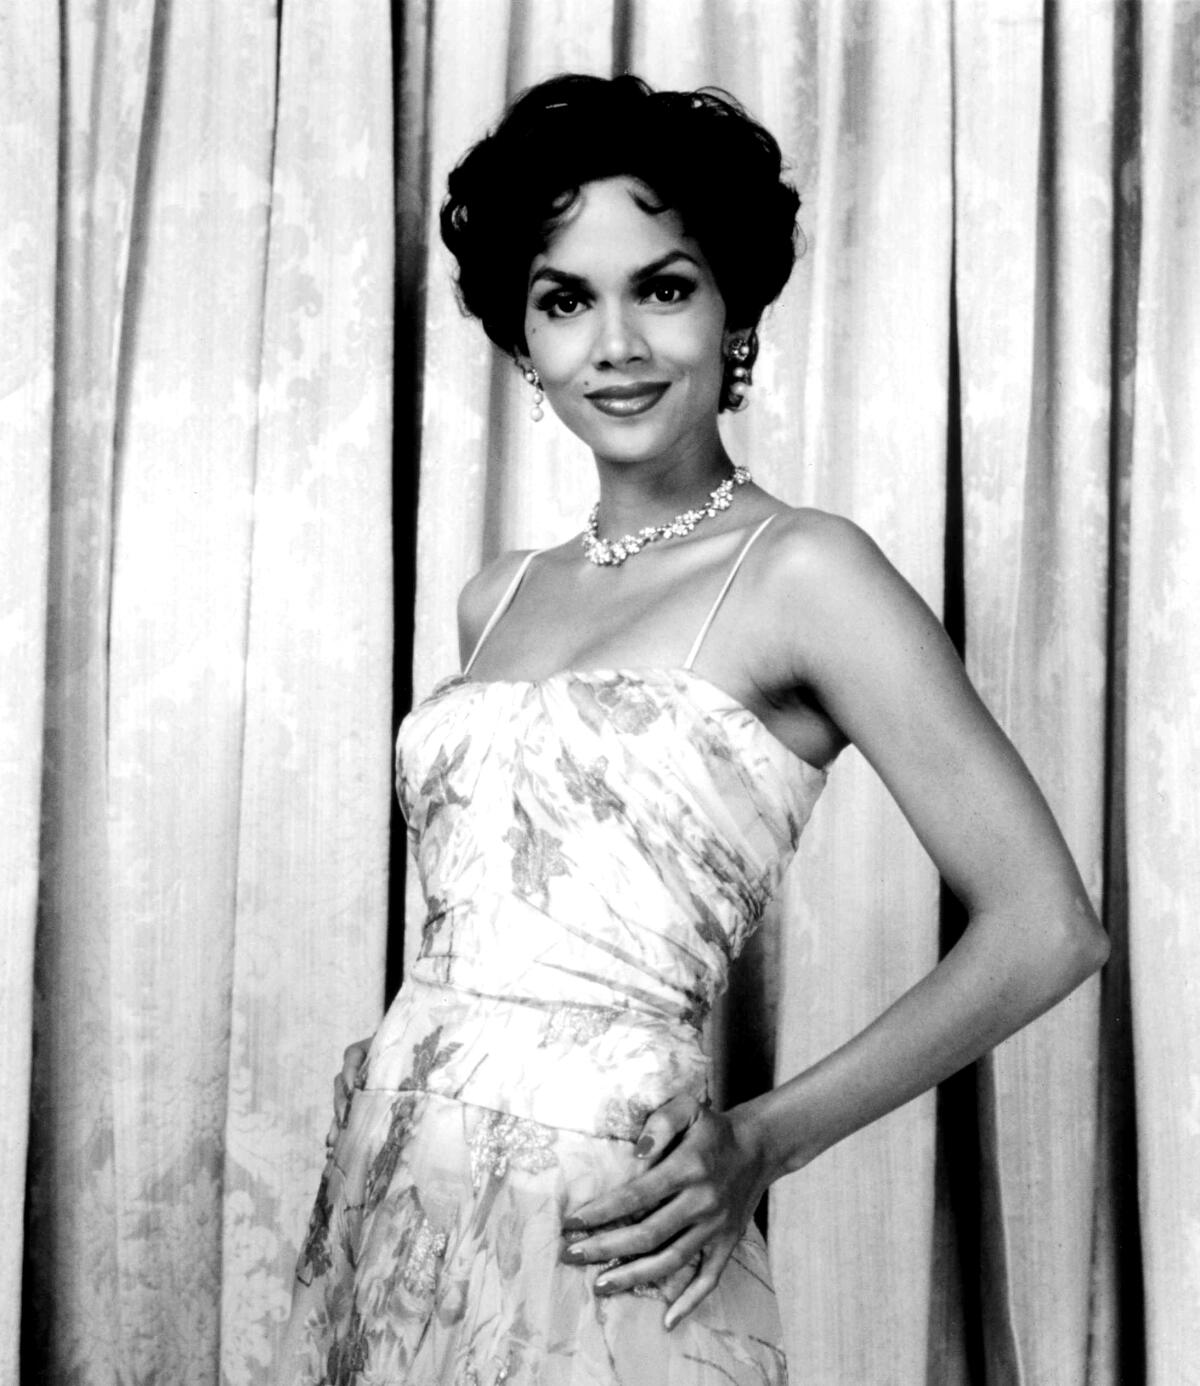 A woman smiles in front of a curtain.